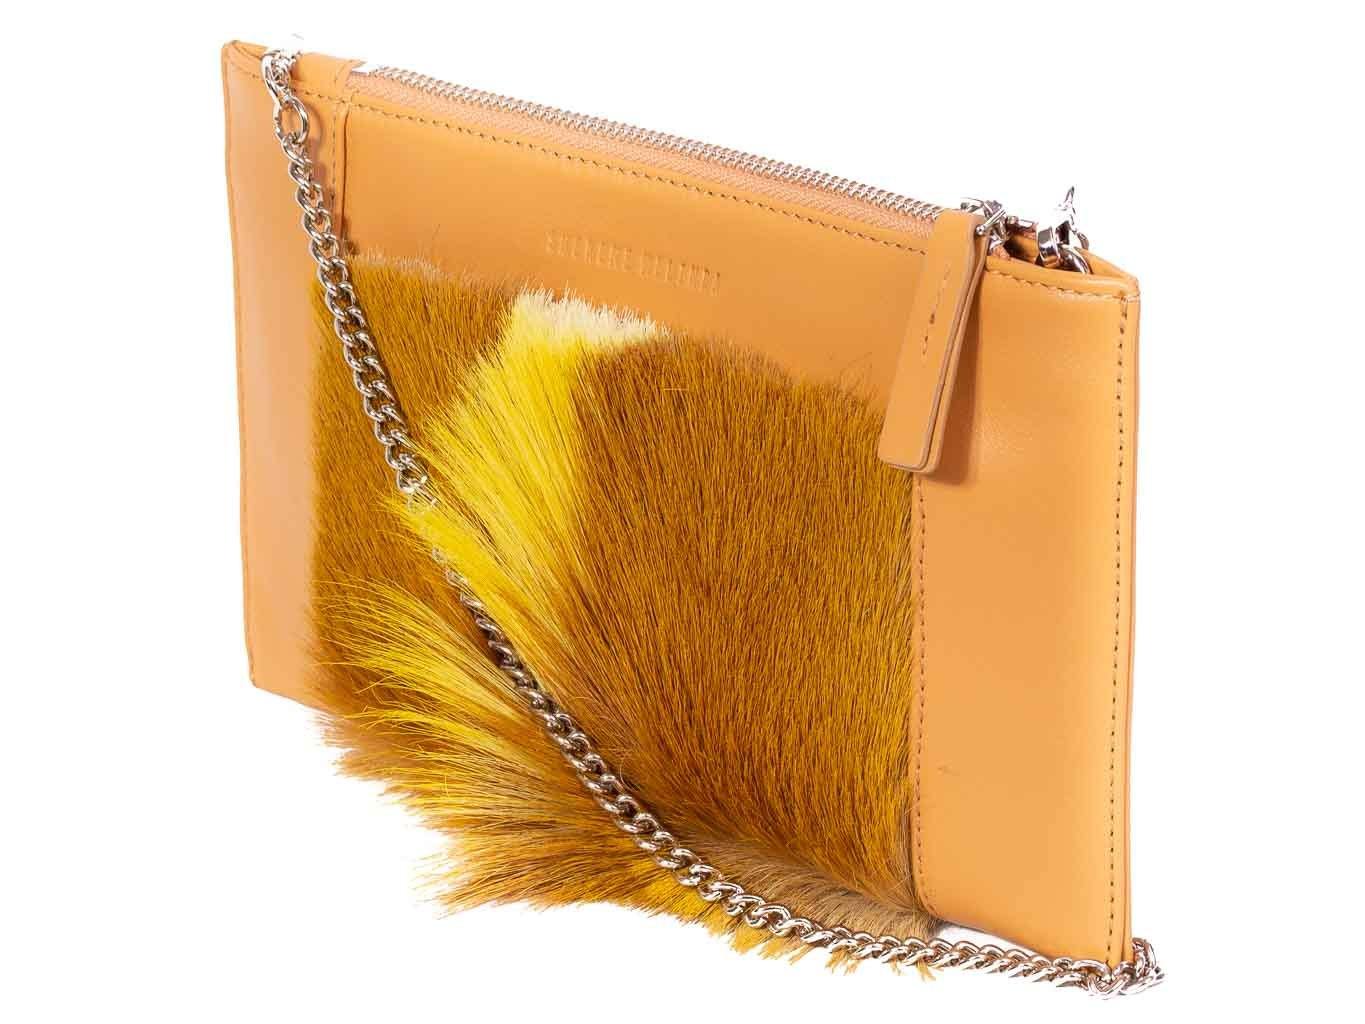 Clutch Springbok Handbag in Sunflower Yellow with a fan feature by Sherene Melinda front strap